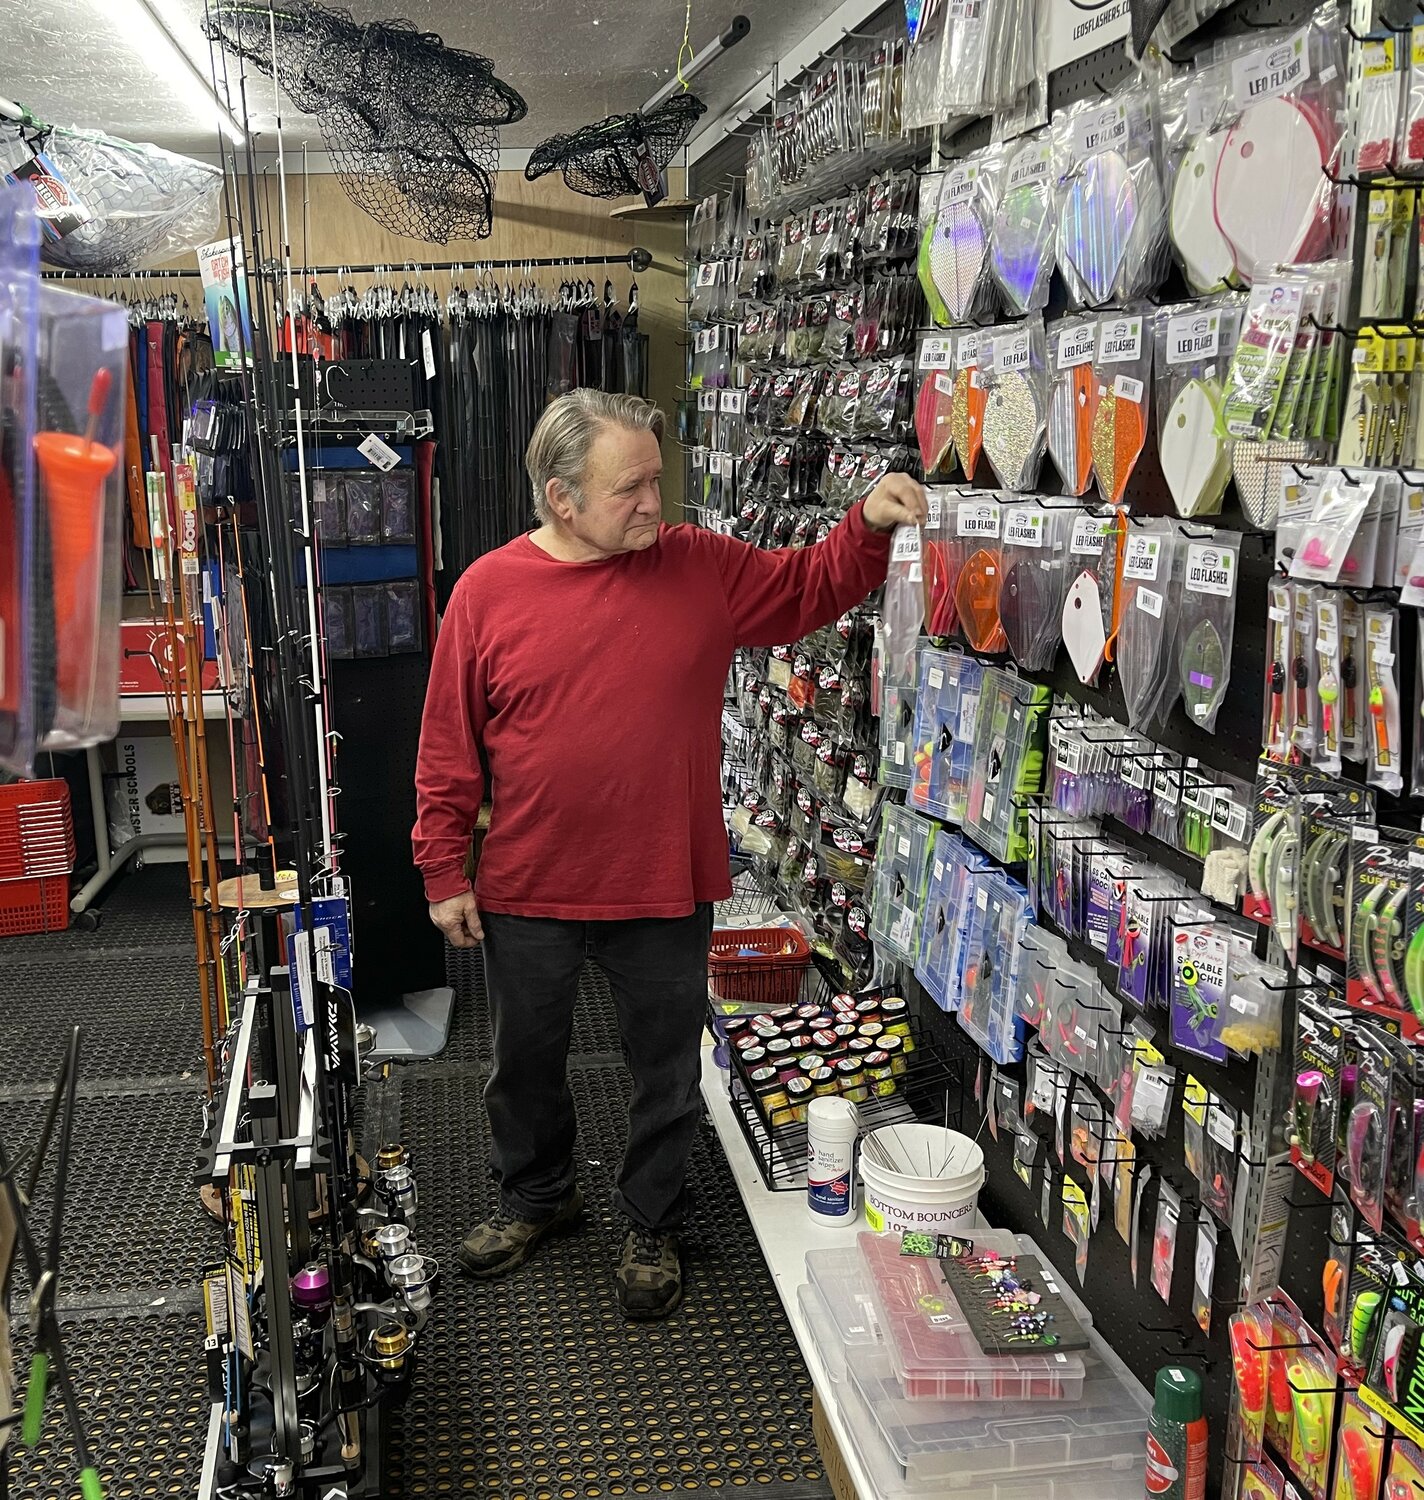 The shop carries a variety of lures and baits popular on local waters.